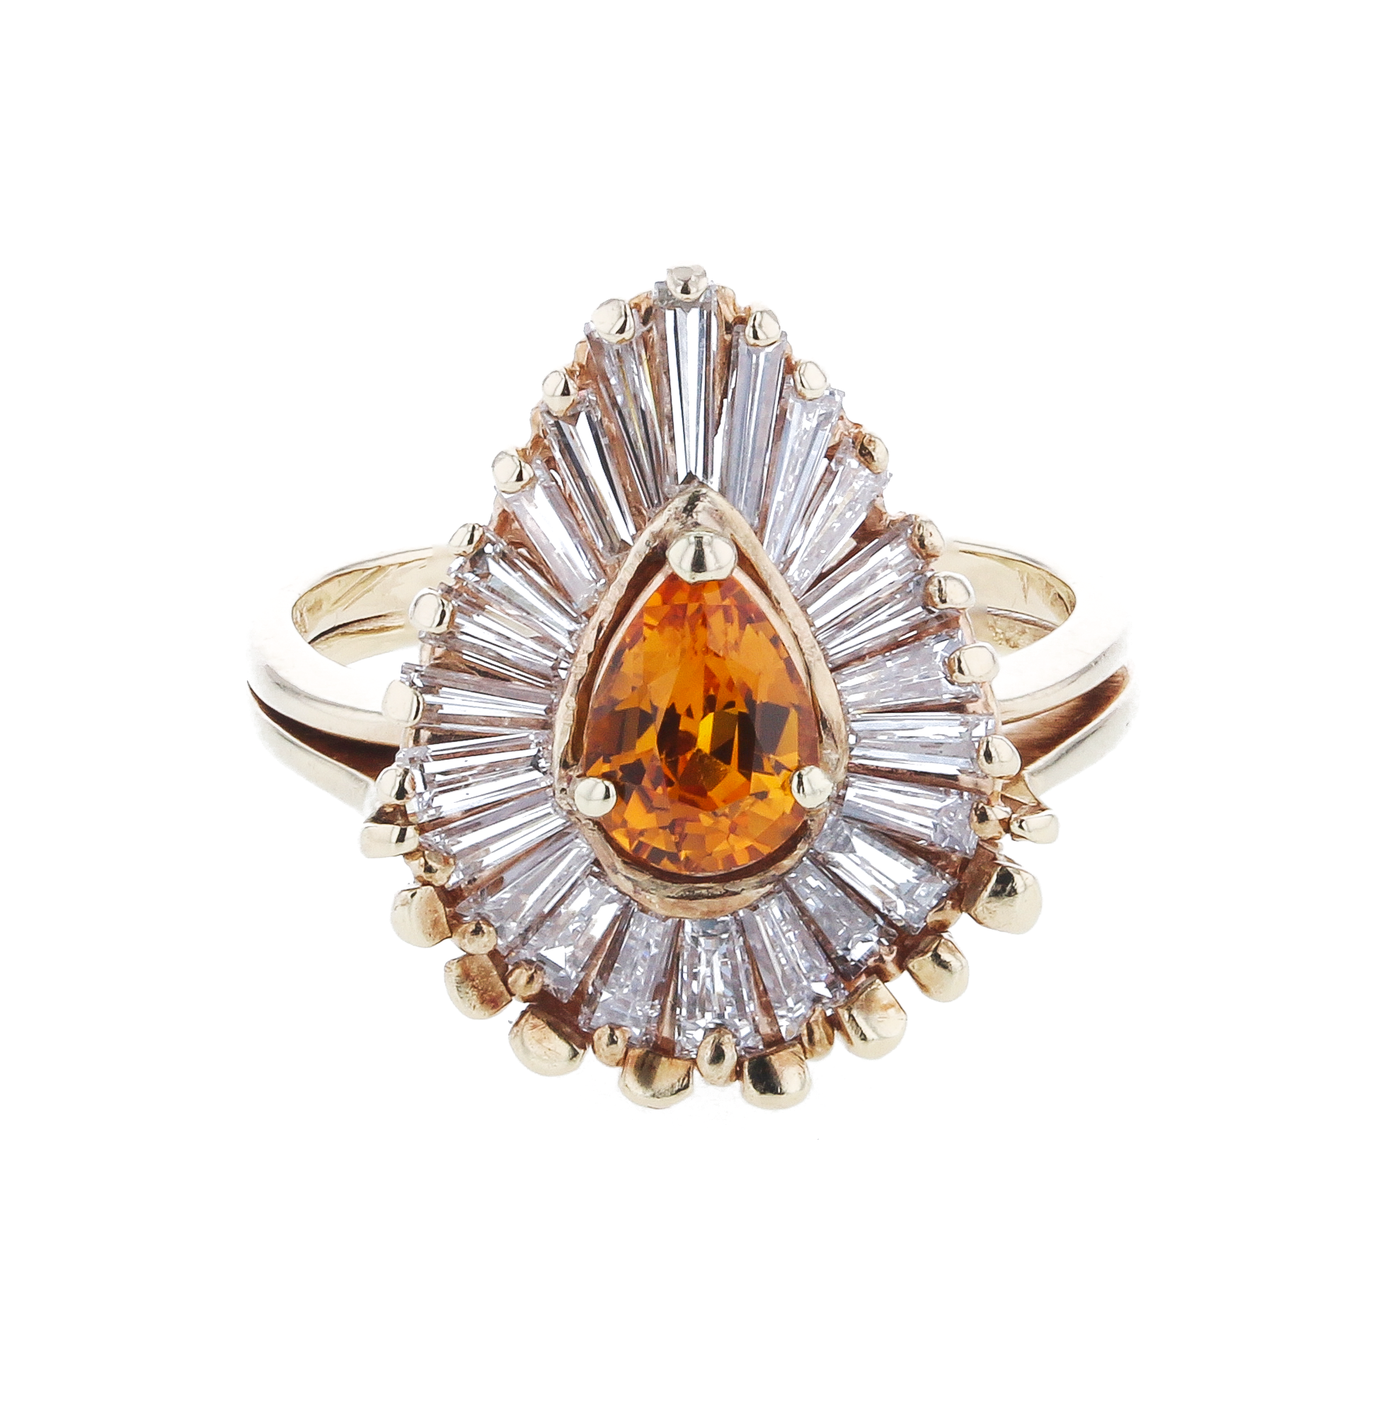 "The Ballerini Citrine and Baguette" .50 CTTW Gold Sapphire and 1.5 CTTW Diamond Ring in 14K Yellow Gold